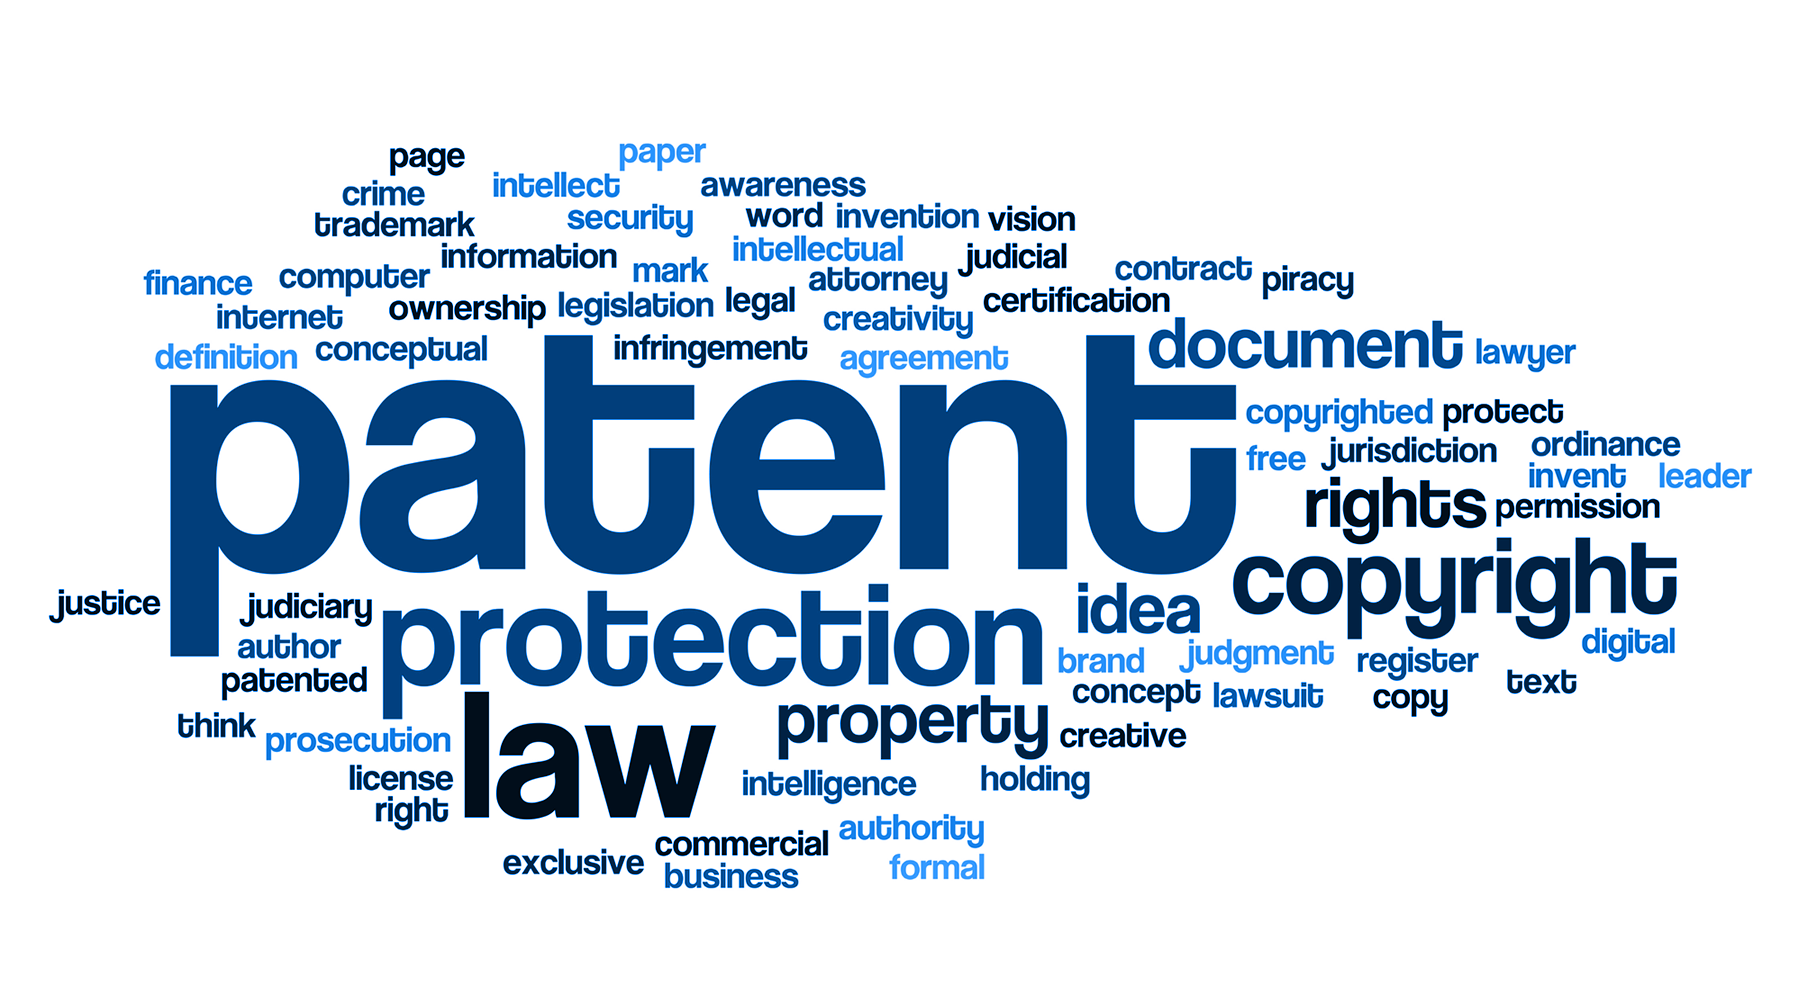 Inspire Patent and Trademark Attorneys